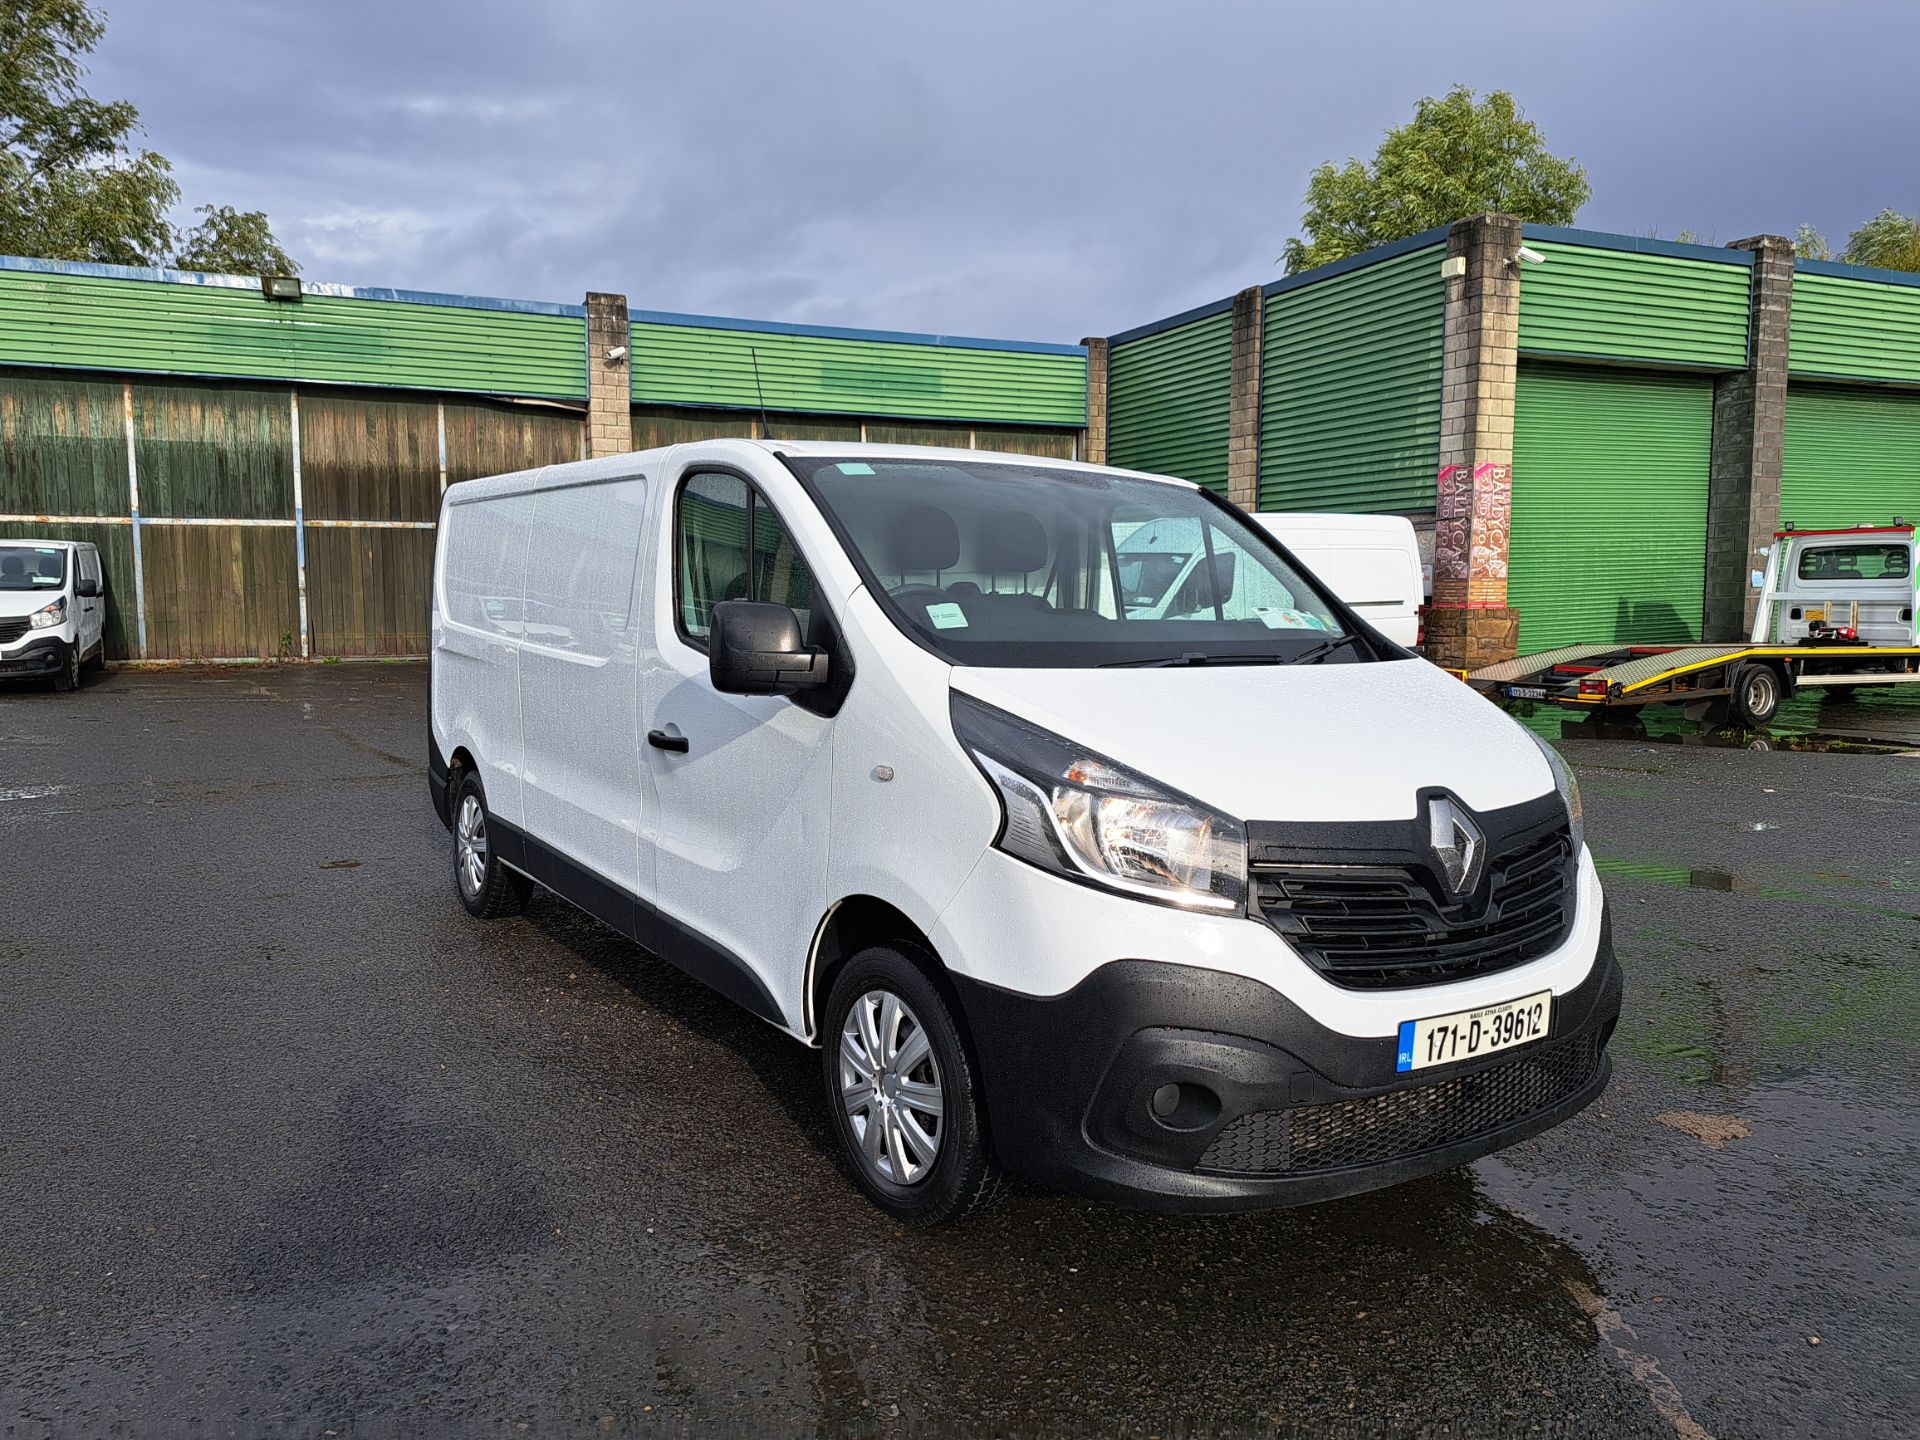 2017 Renault Trafic LL29 DCI 120 Business 3DR (171D39612) Image 1